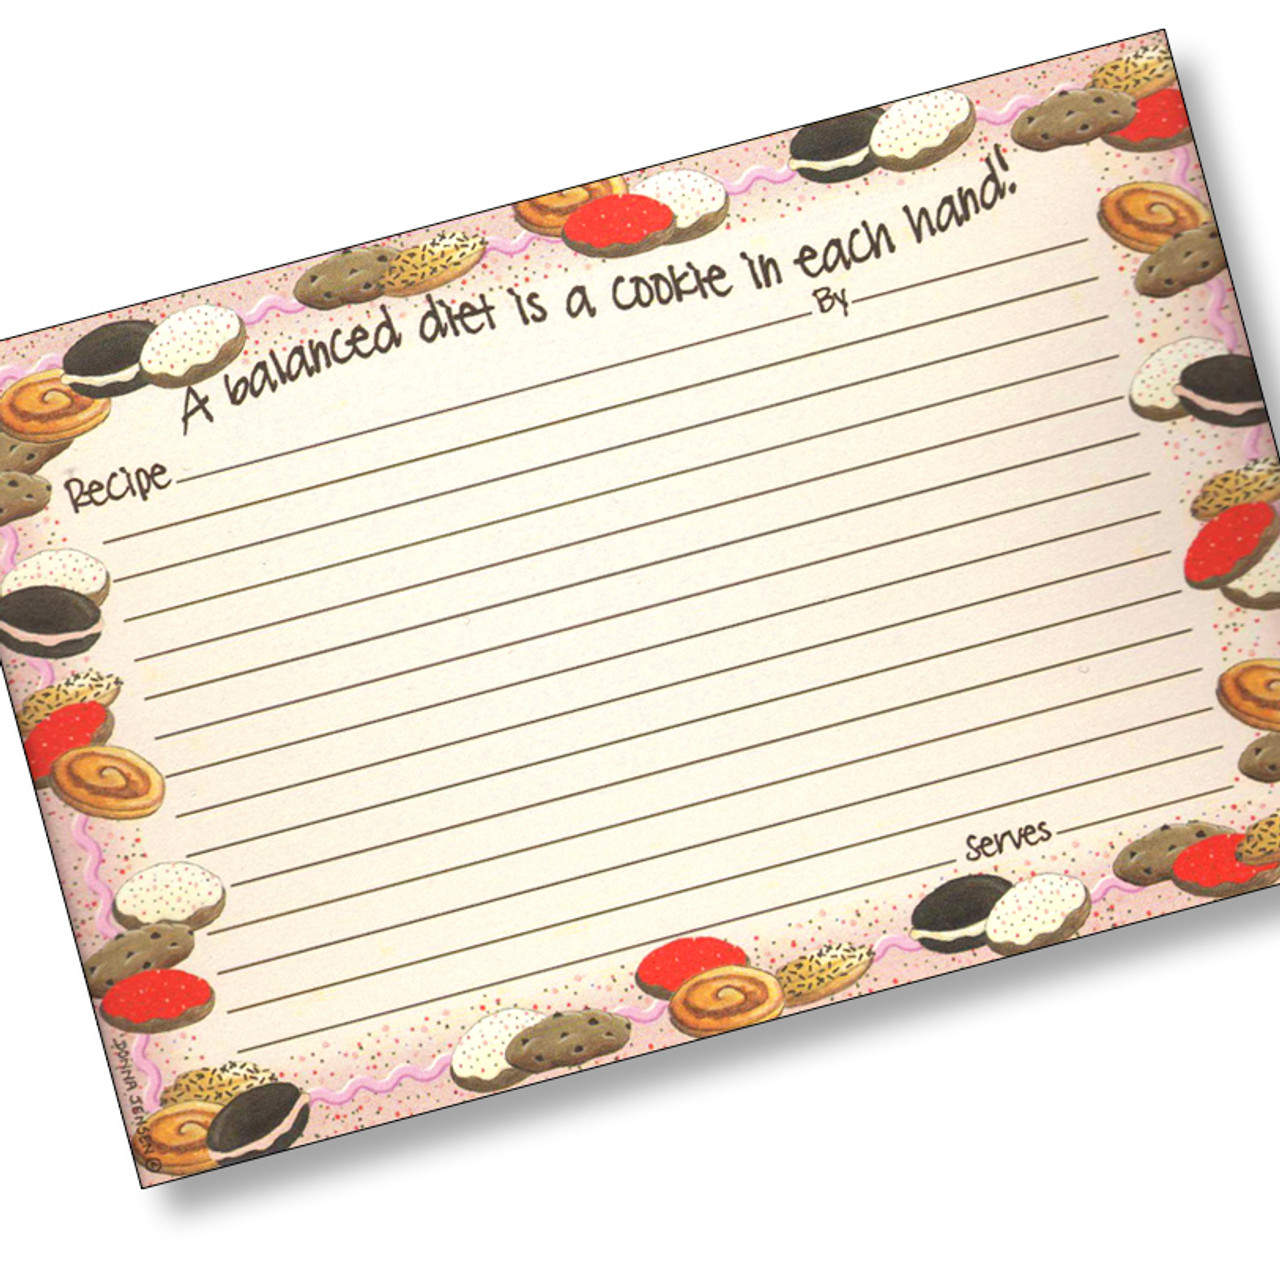 beautiful-4x6-recipe-card-earth-friendly-made-in-usa-cookies-crumbles-4x6